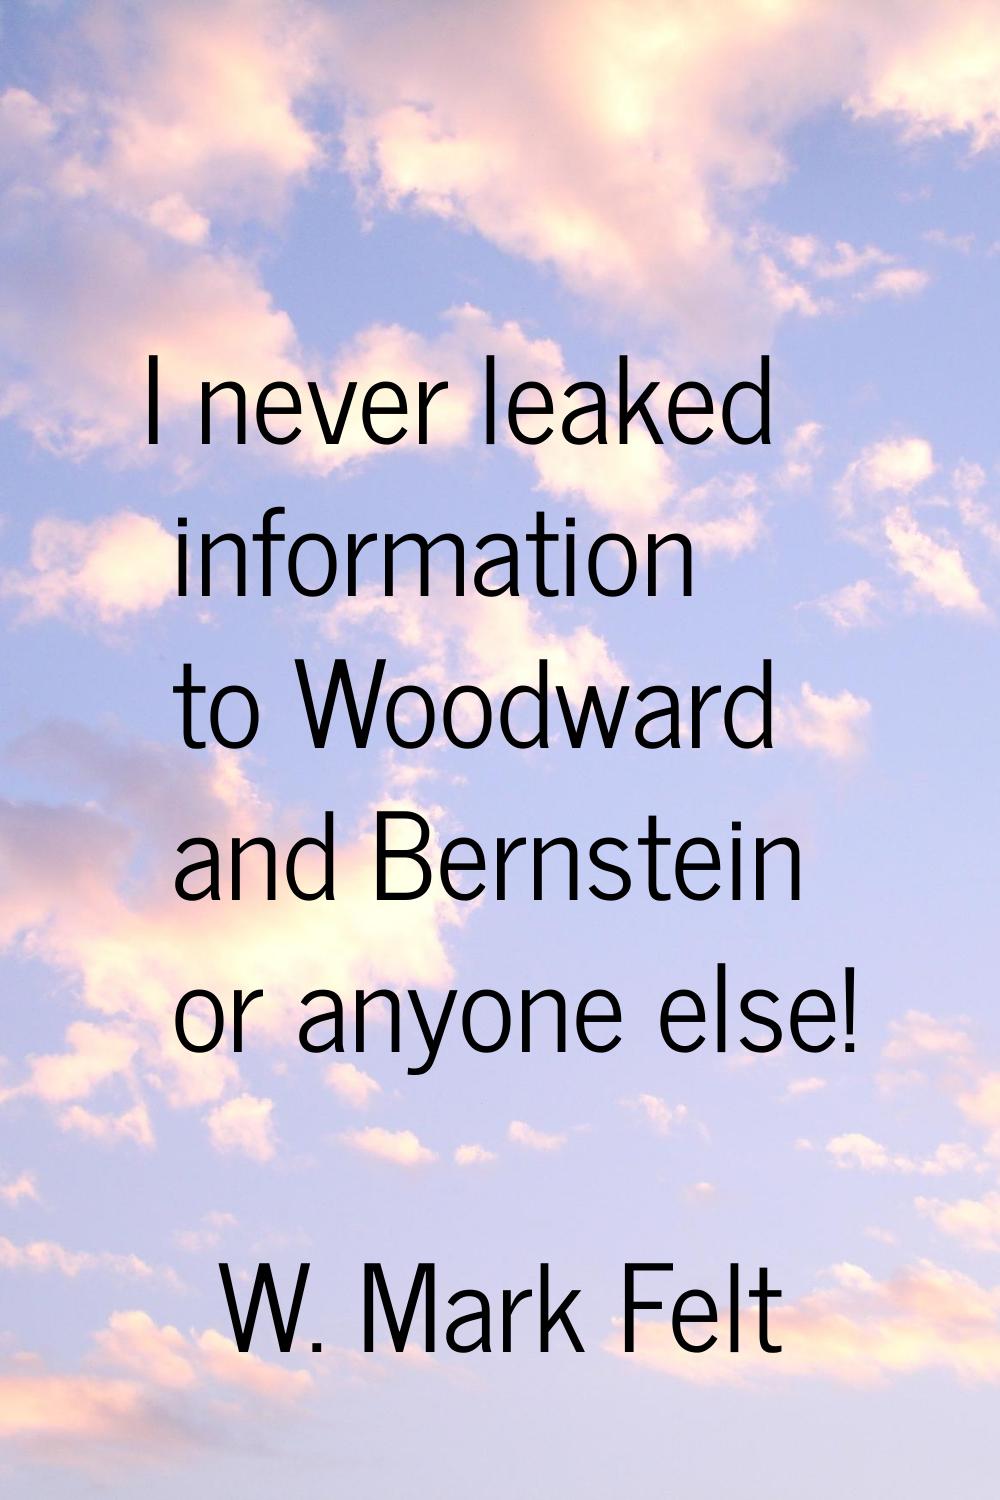 I never leaked information to Woodward and Bernstein or anyone else!